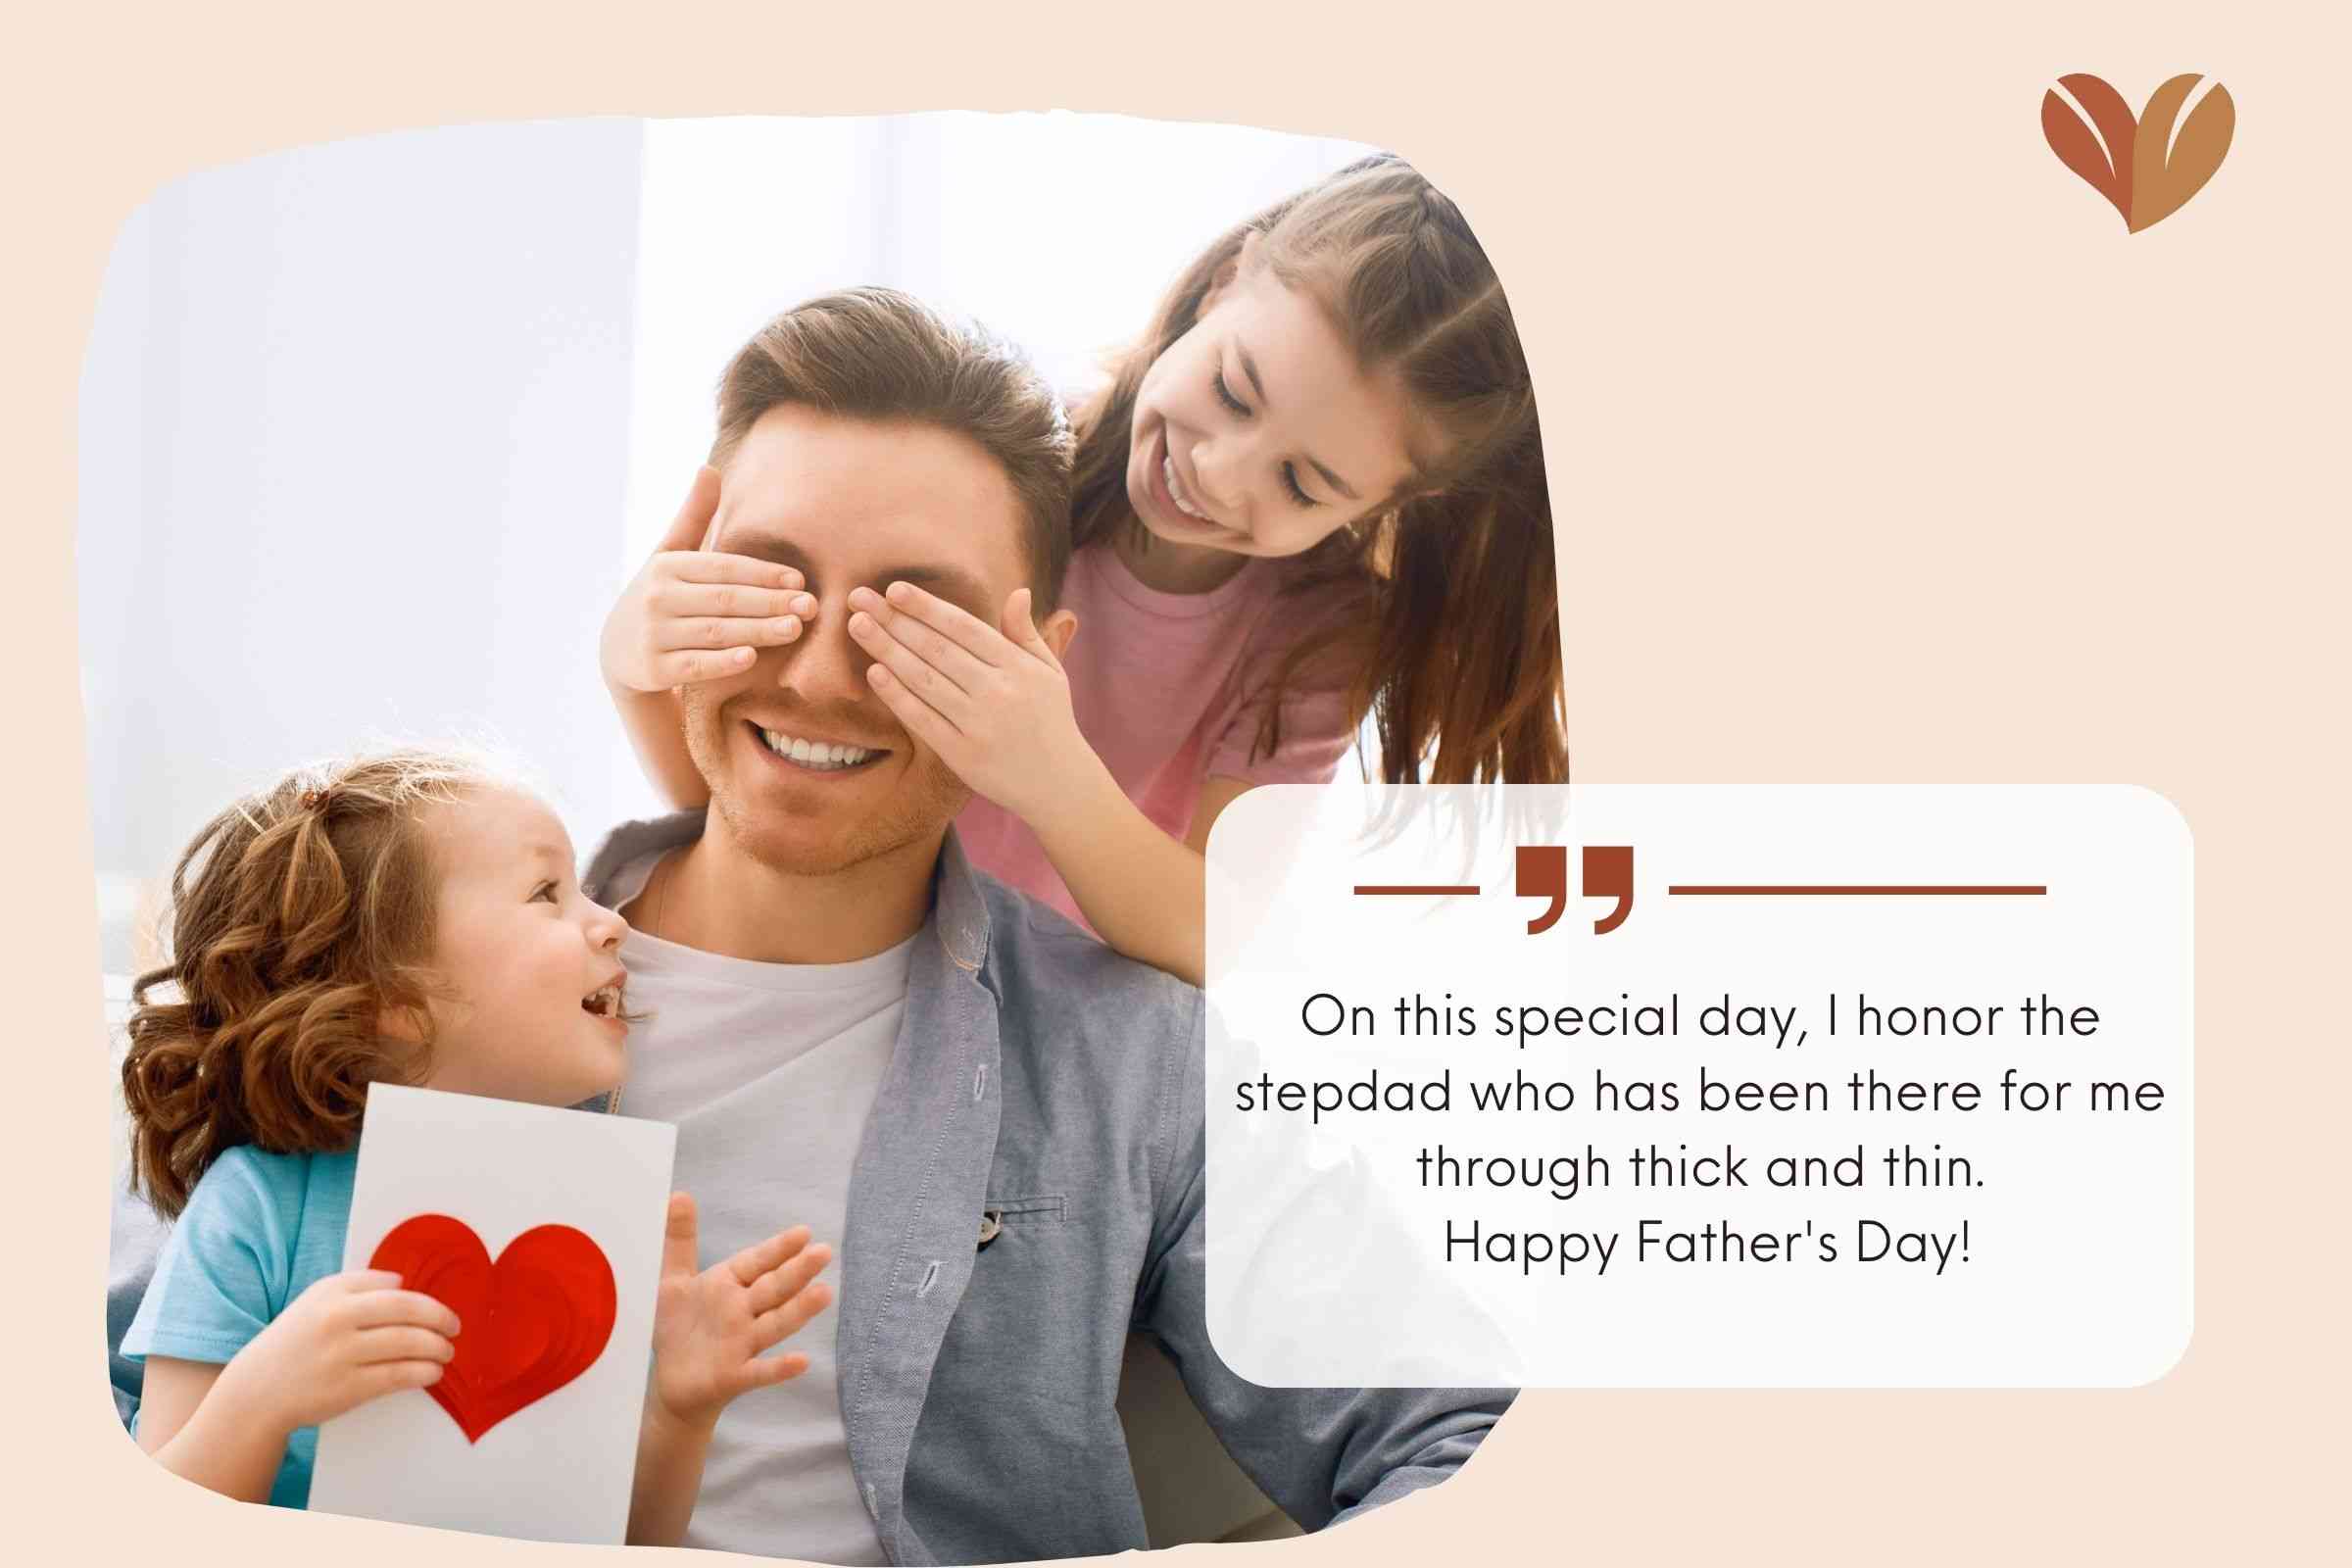 A Step Above: Heartfelt Father's Day Messages for Stepdad